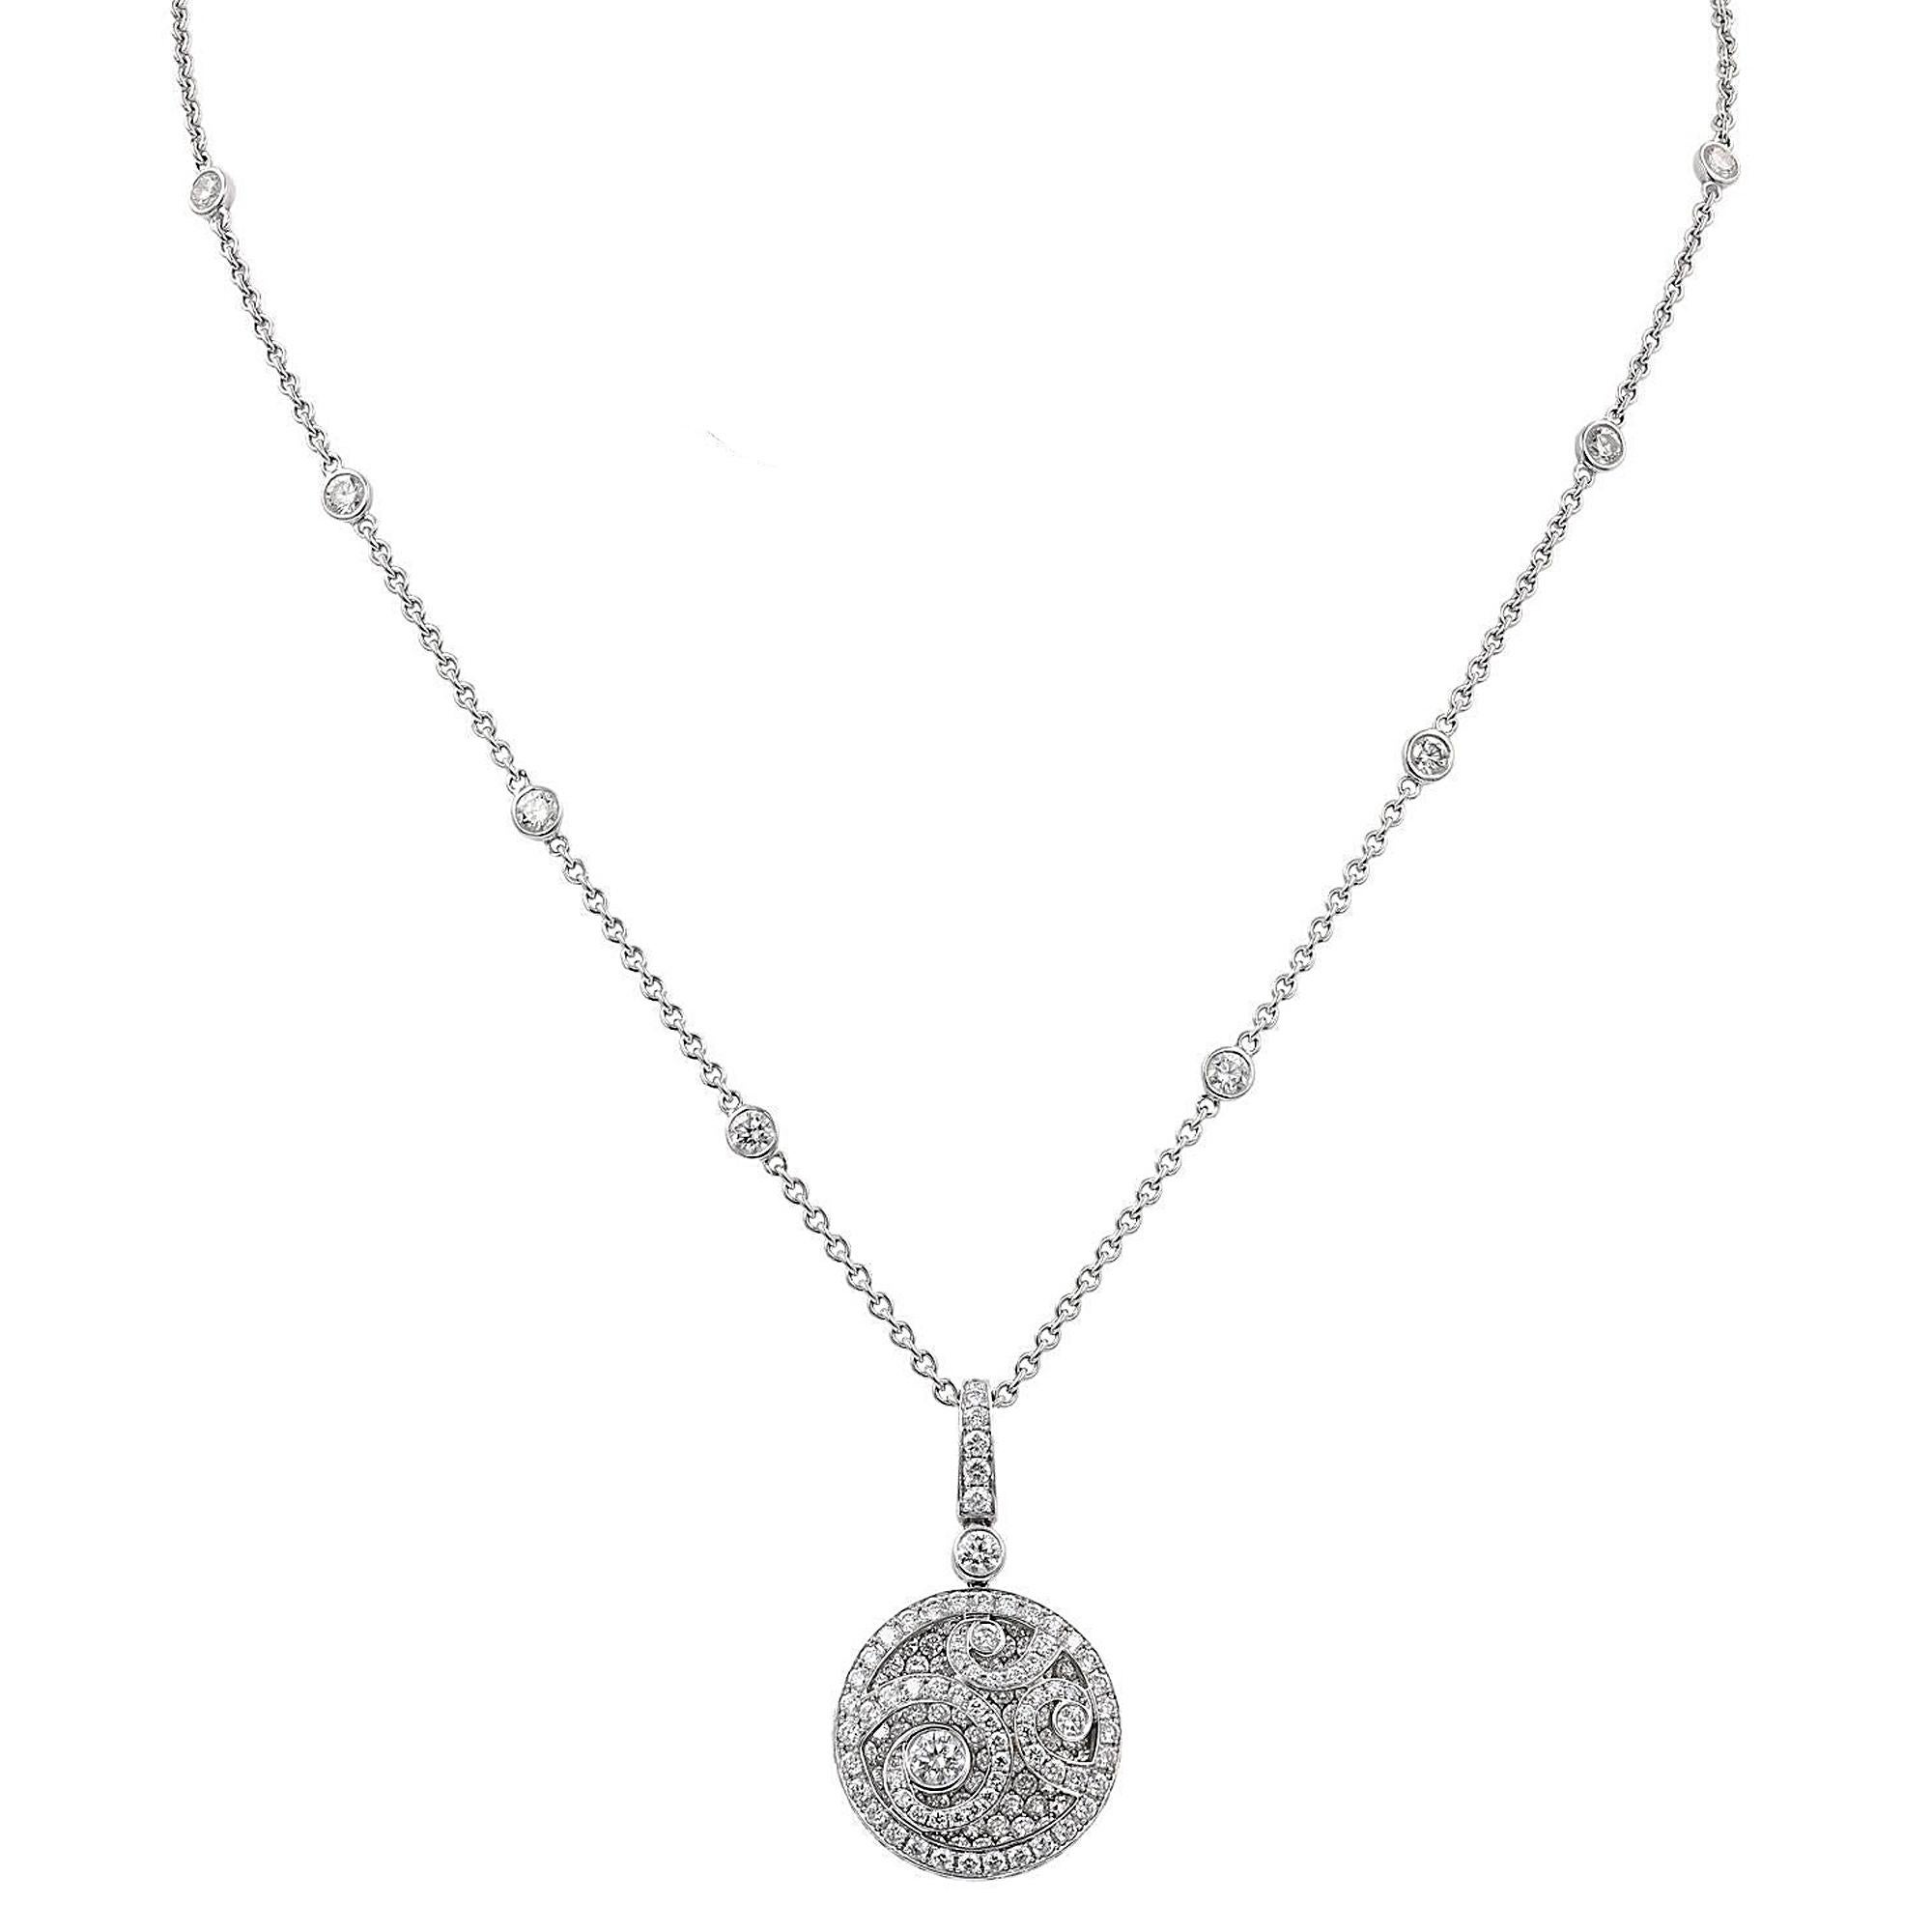 The Graff Diamond on Diamond Pendant White Gold Necklace is more than just a piece of jewelry; it's a symbol of sophistication and unparalleled craftsmanship. With its stunning design and brilliant diamonds, this necklace is sure to become a